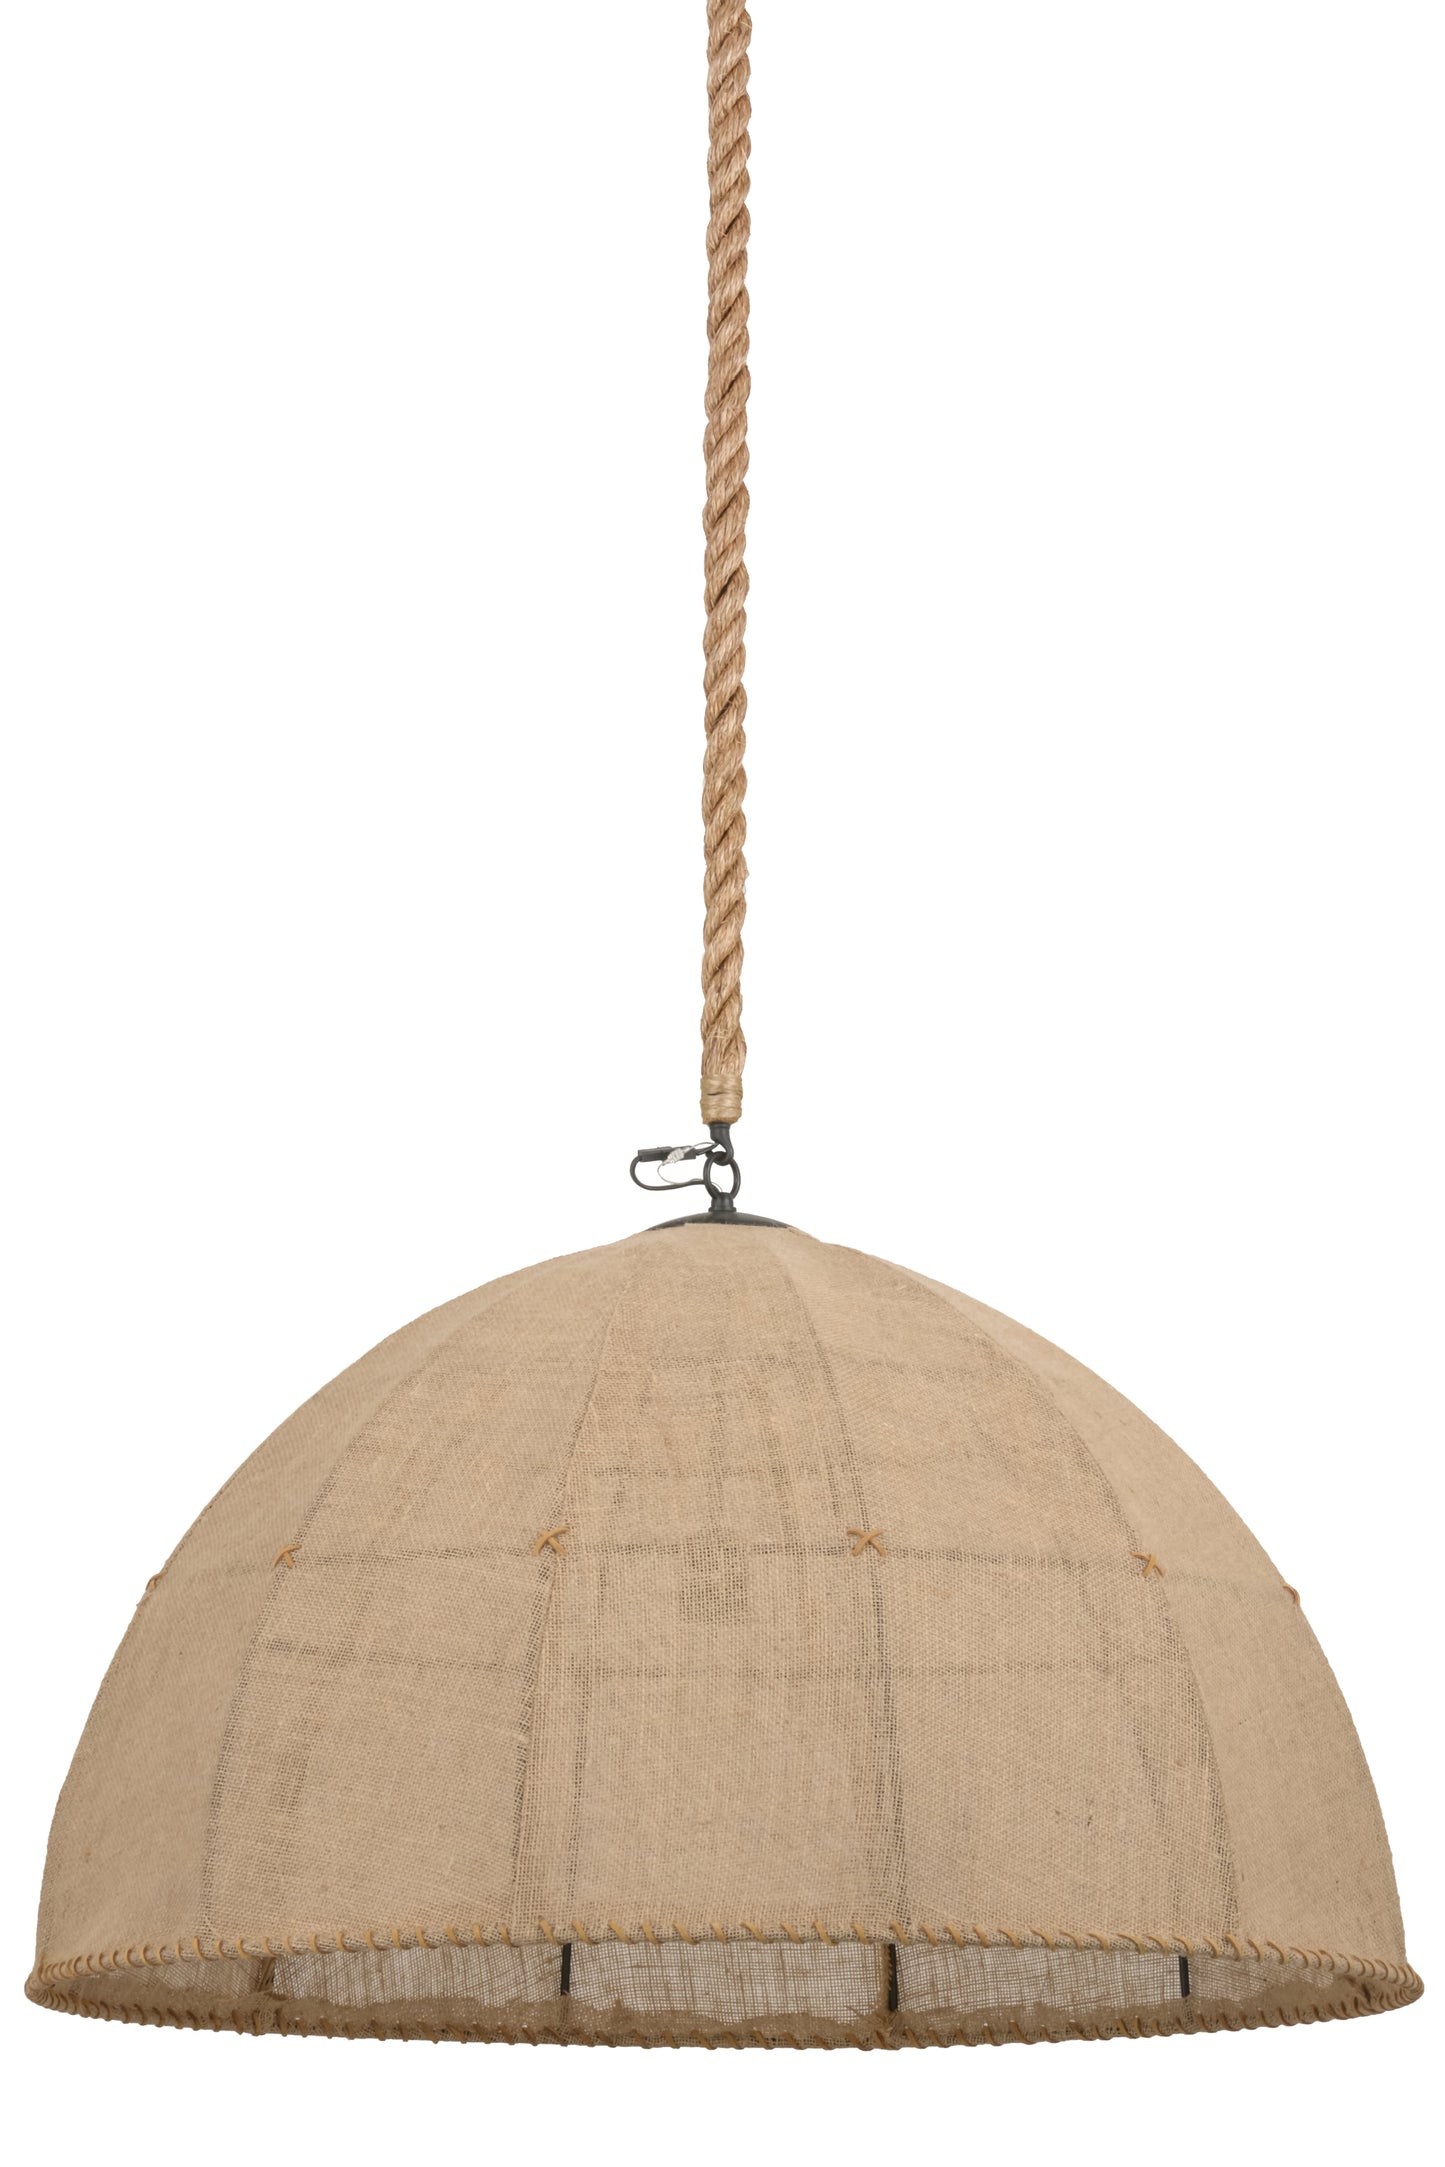 36" Empire Dome Textrene Pendant by 2nd Ave Lighting